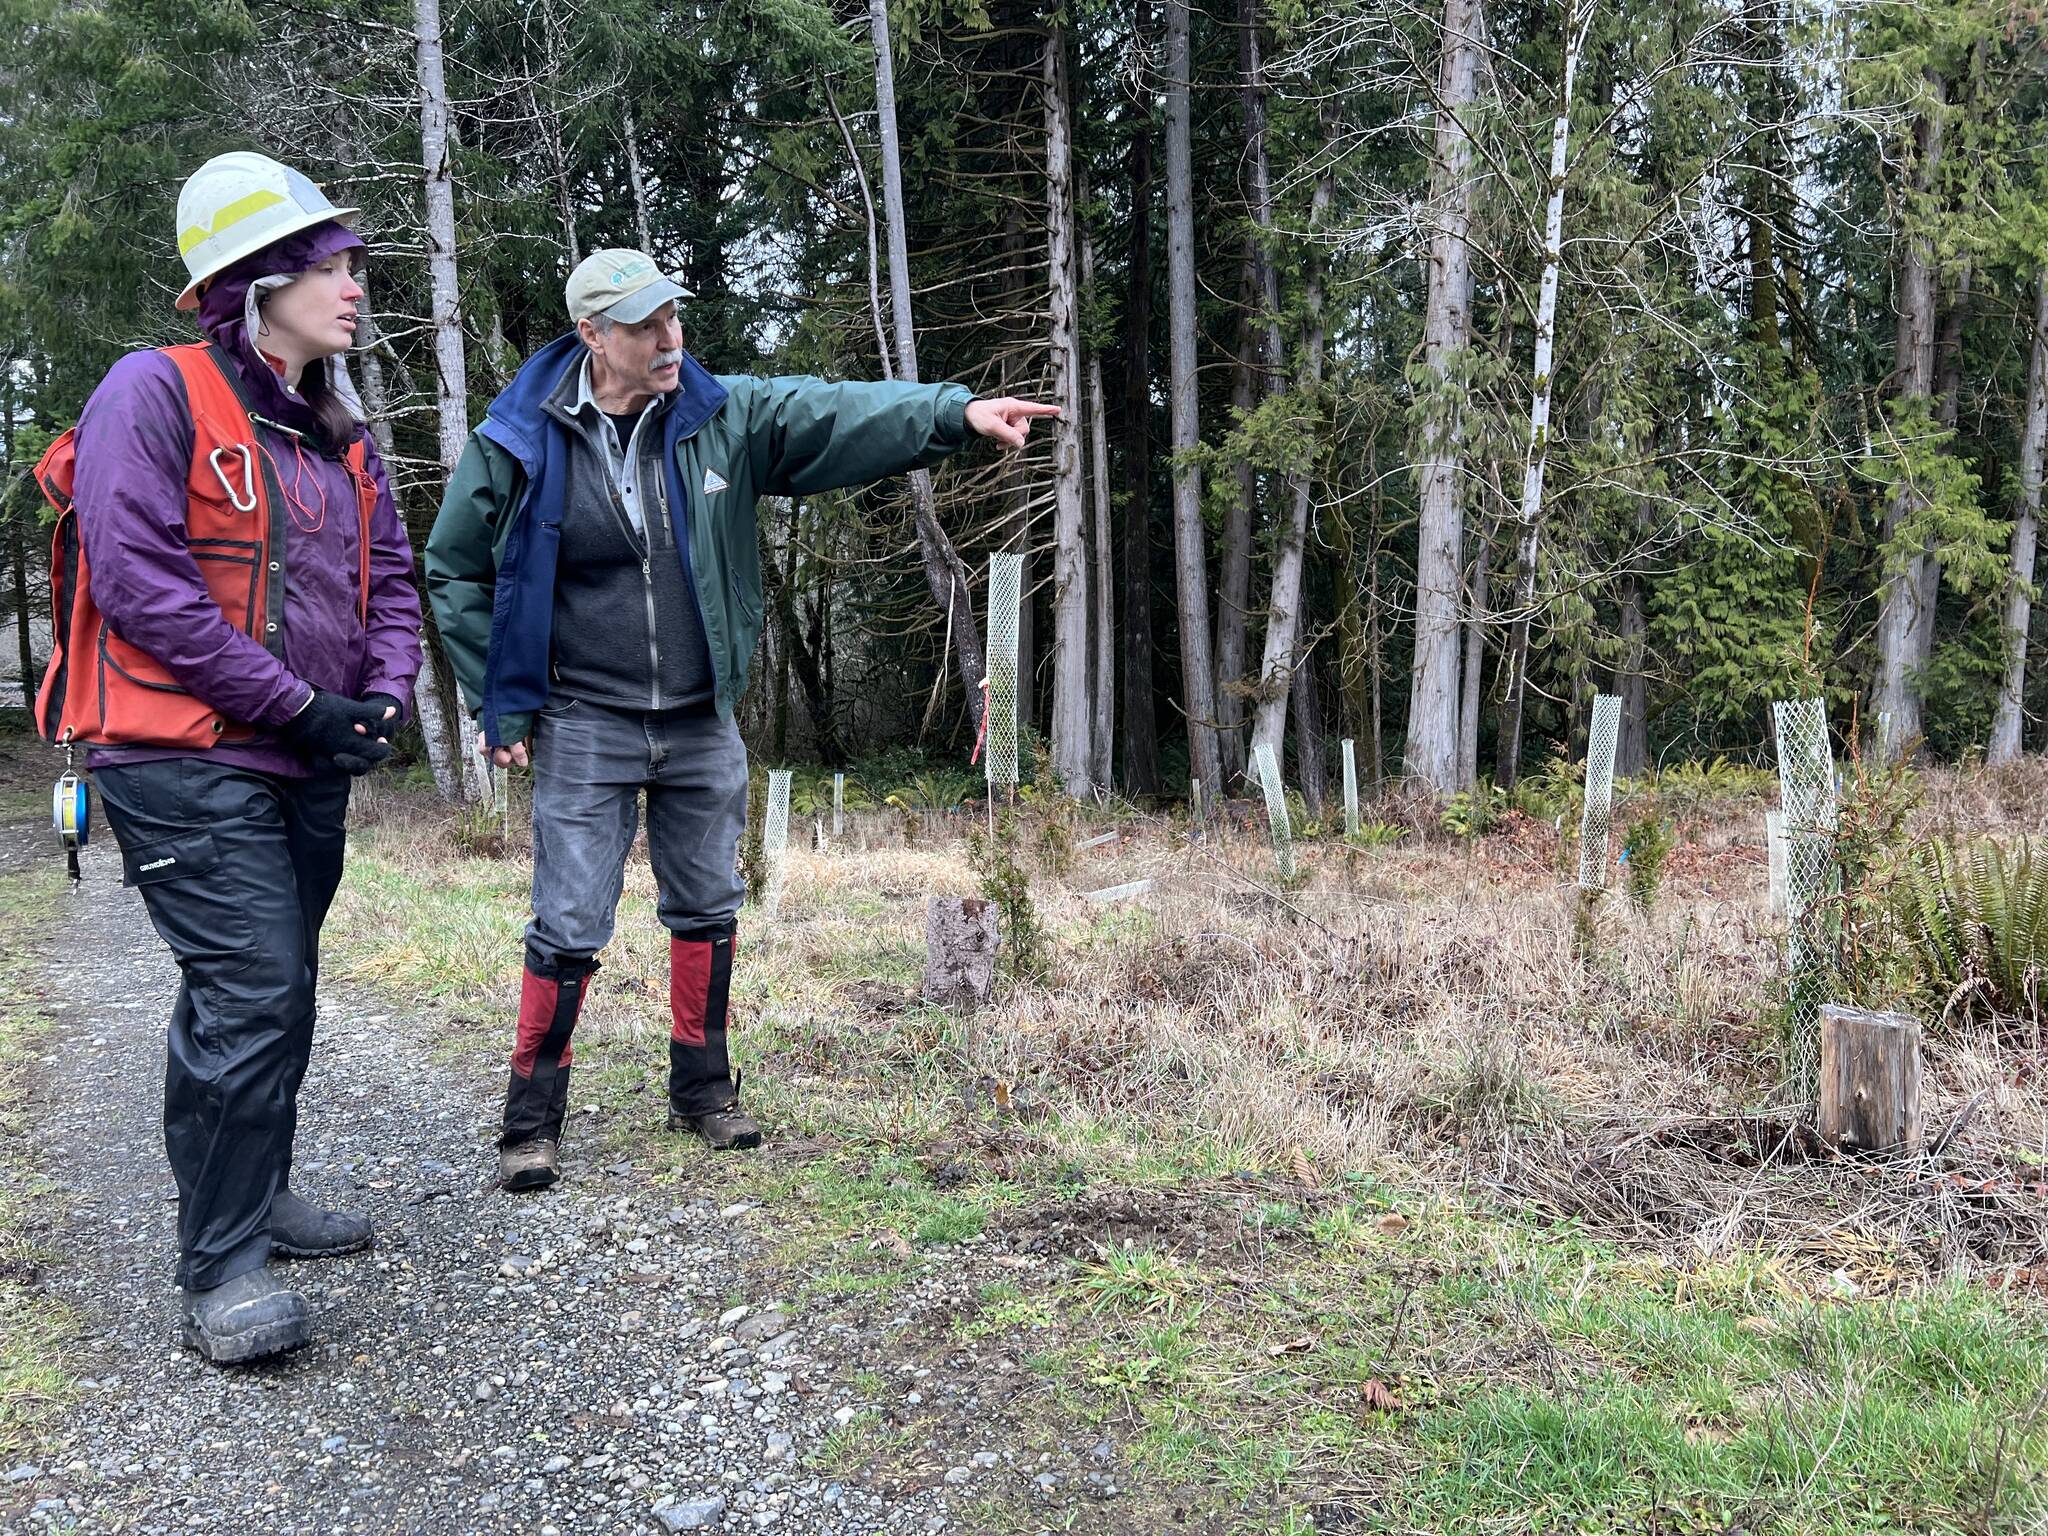 (Clayton Franke / The Daily World) Emily Fales, left, a service forester with the Washington Department of Natural Resources, takes a tour of Merc Boyer's family forest. The DNR has added 18 new service foresters, who provide technical assistance to landowners, in the last six months.